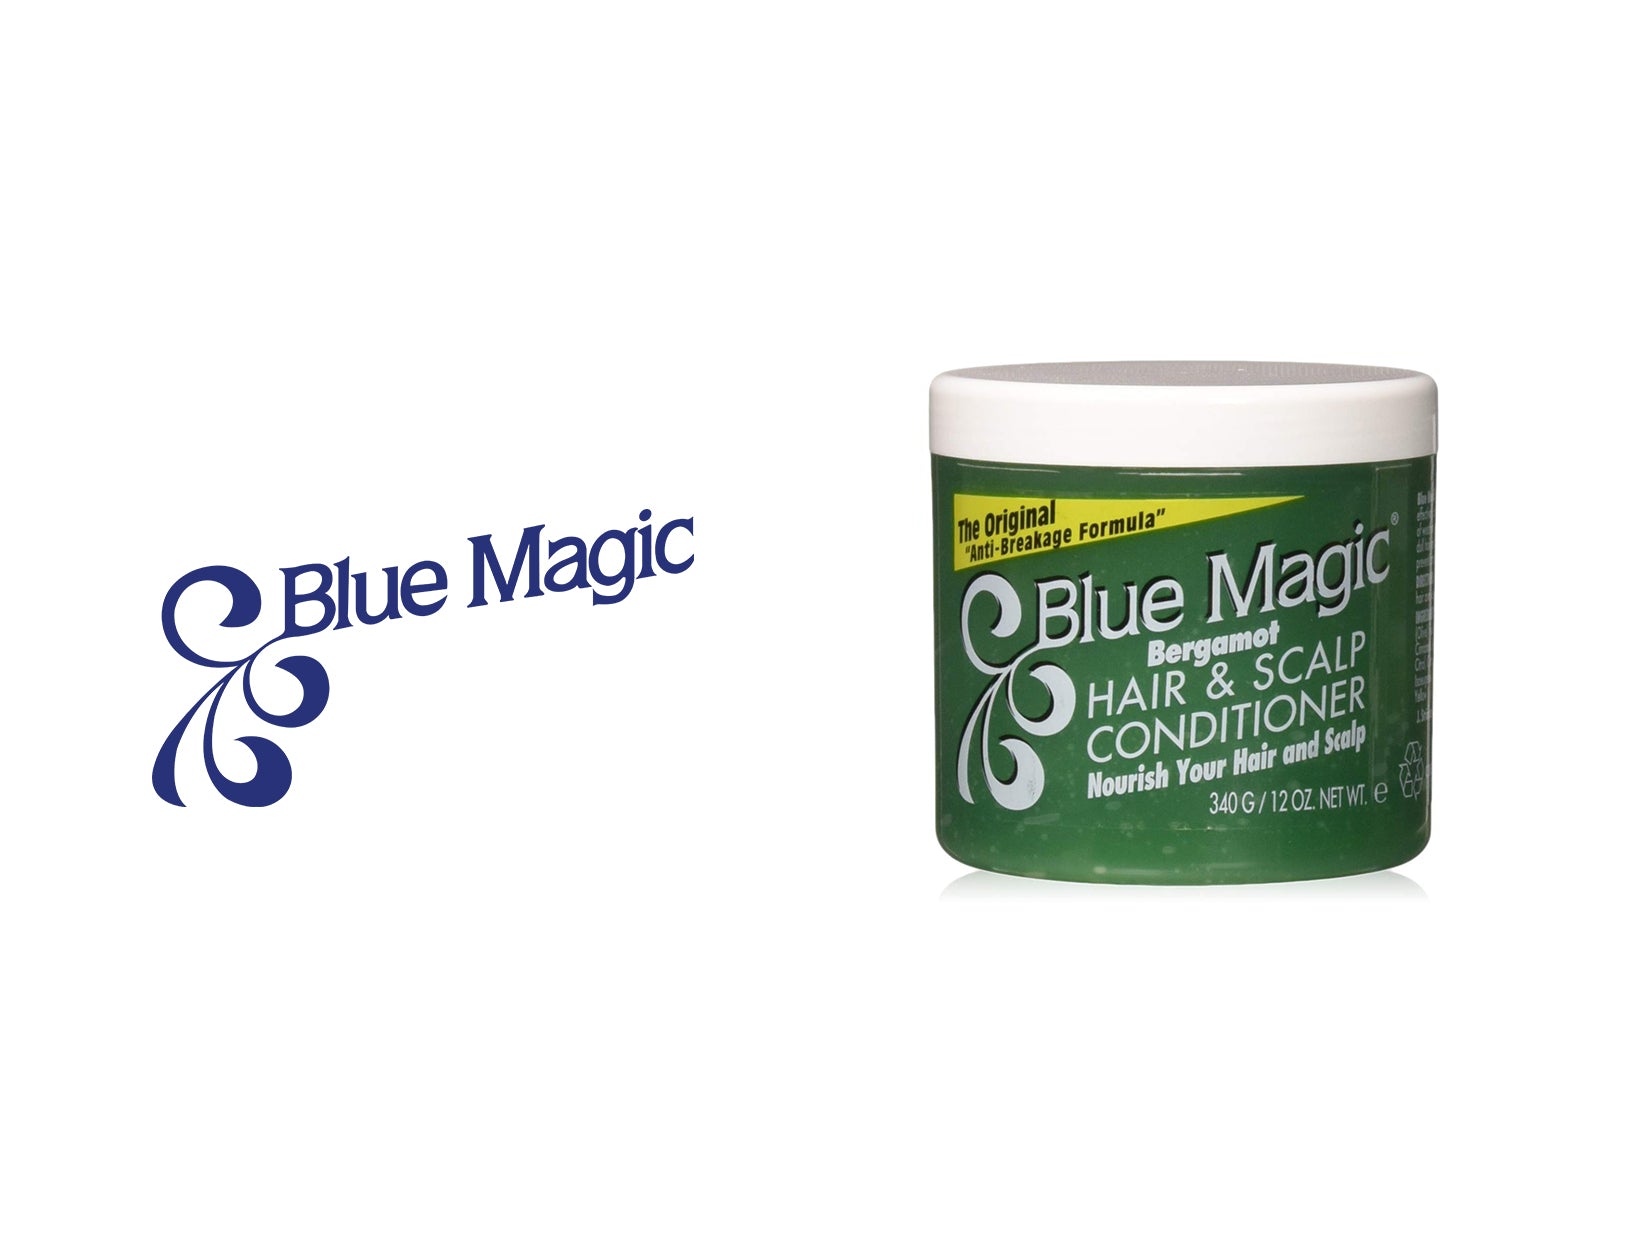 Blue Magic Hair & Scalp Conditioner, 12 Ounce Jar (Pack of 3) - wide 9